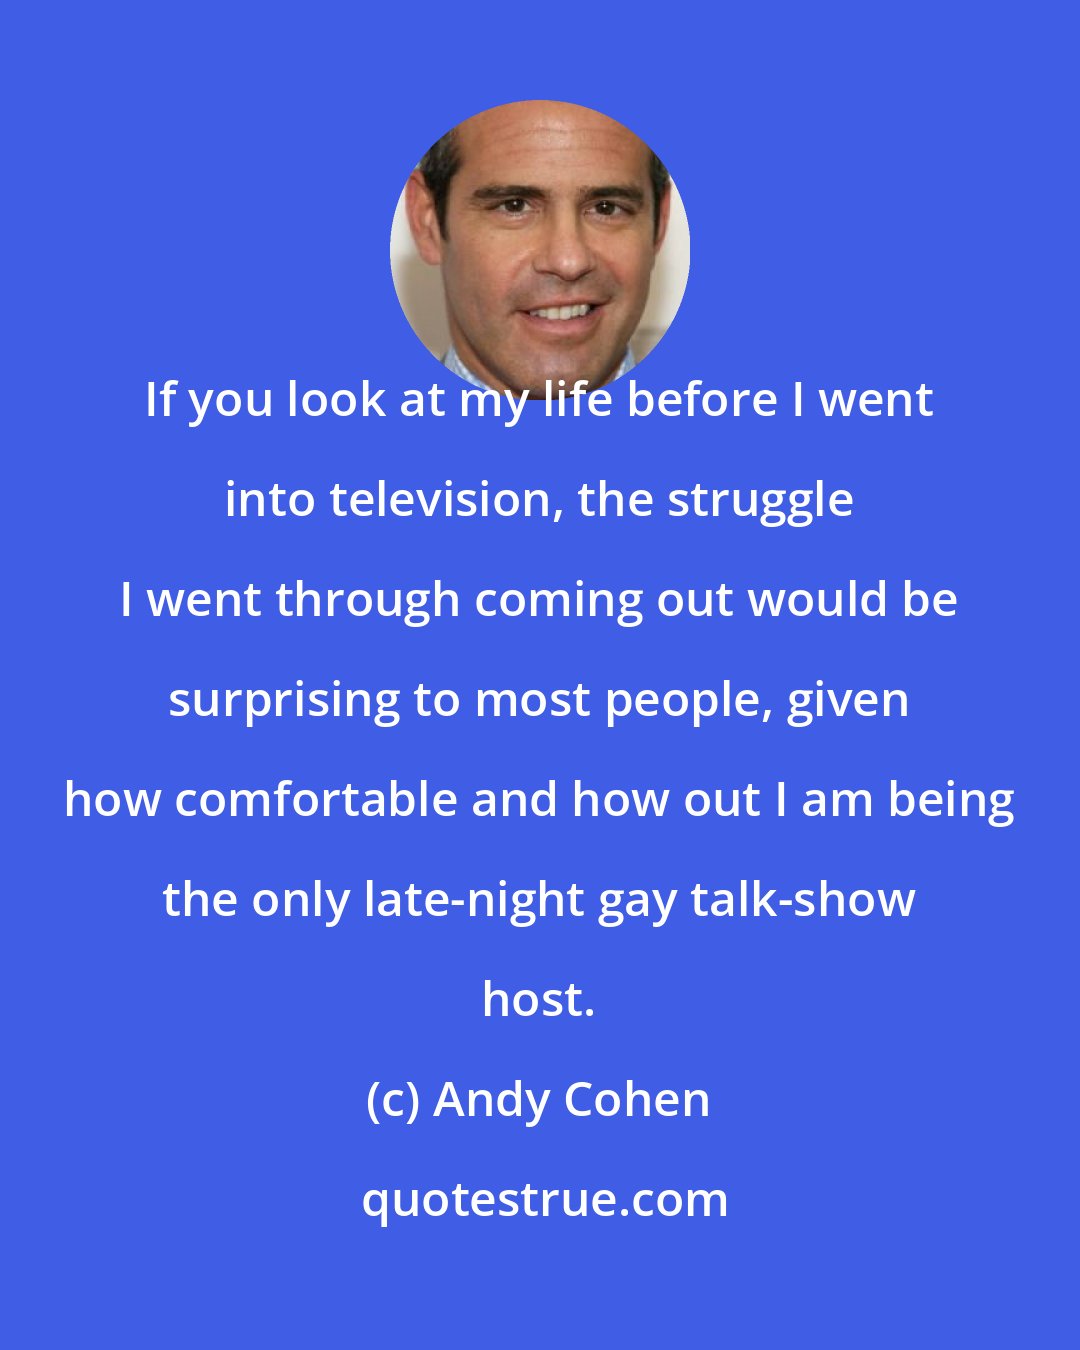 Andy Cohen: If you look at my life before I went into television, the struggle I went through coming out would be surprising to most people, given how comfortable and how out I am being the only late-night gay talk-show host.